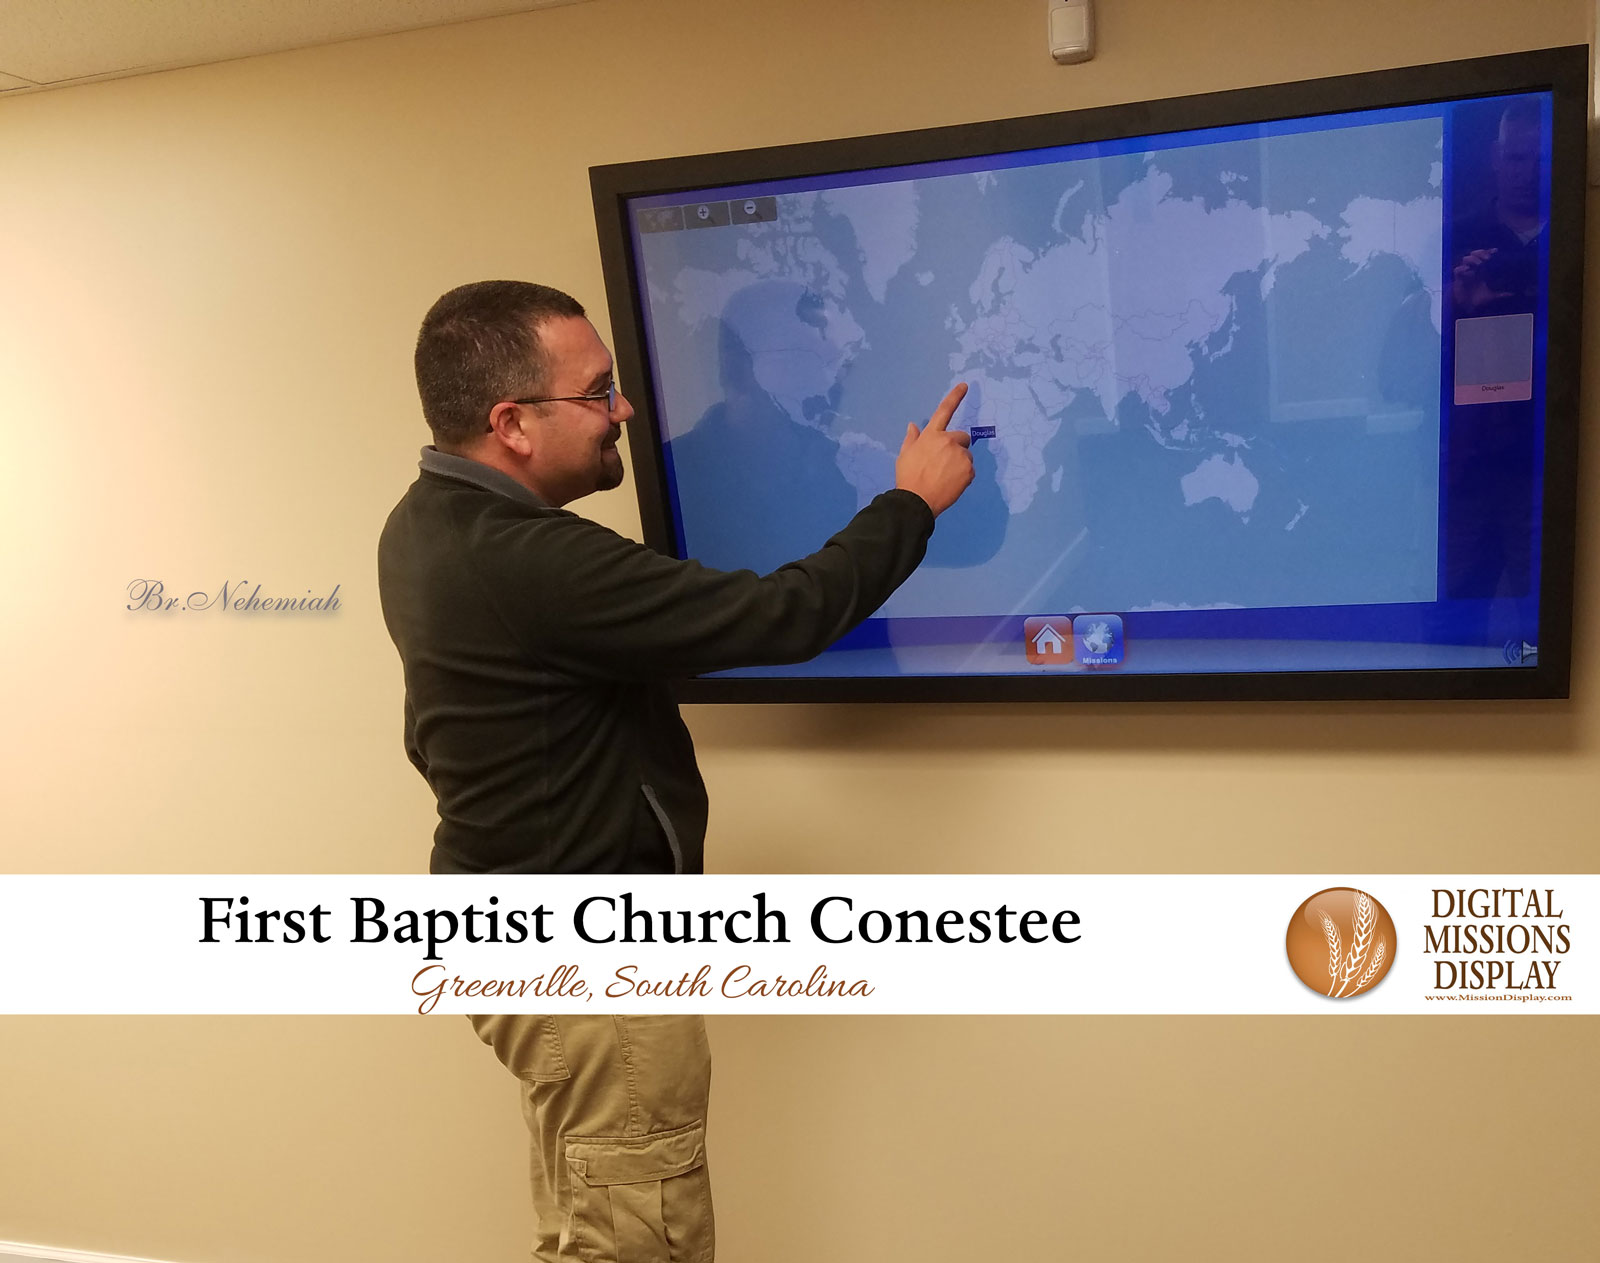 Mission Display Brother Nehemiah at First Baotist Church of Conestee Greenville South Carolina